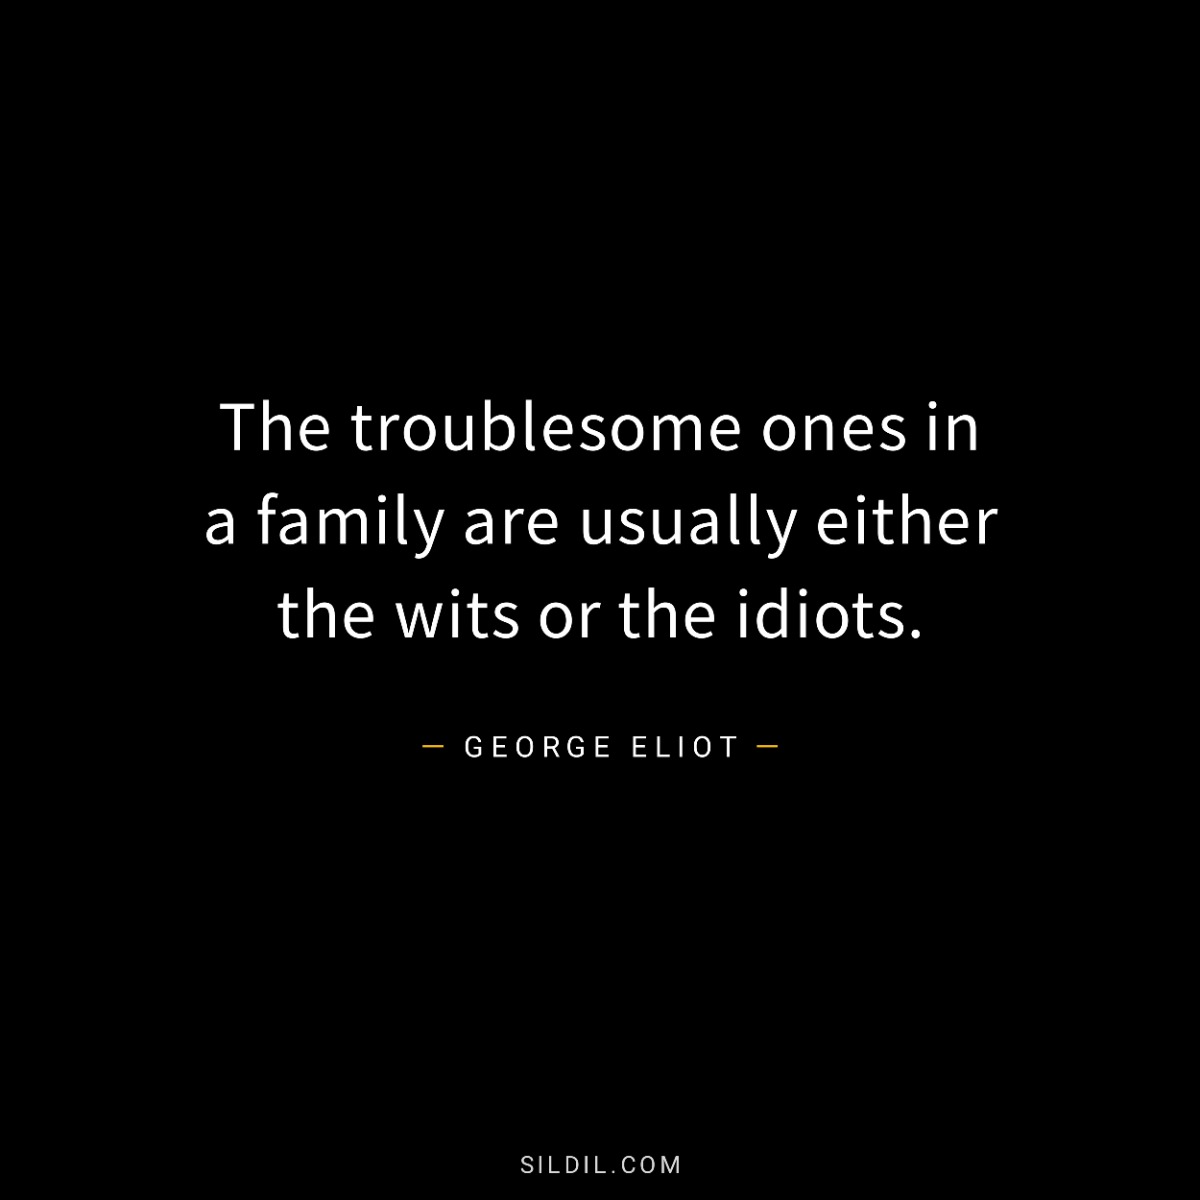 The troublesome ones in a family are usually either the wits or the idiots.